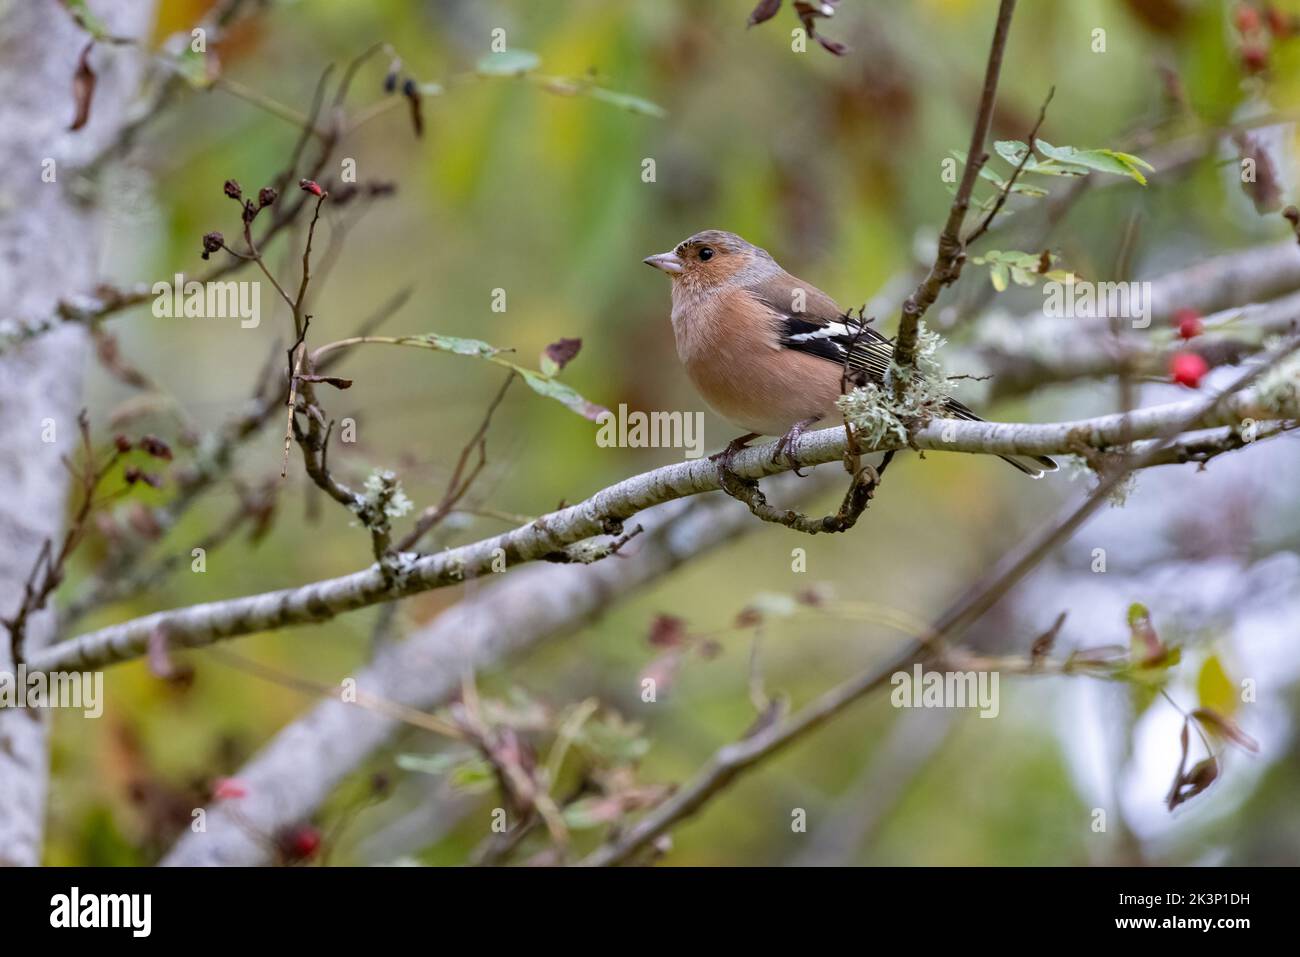 Male chaffinch [ Fringilla coelebs ] in tree with a few red berries Stock Photo